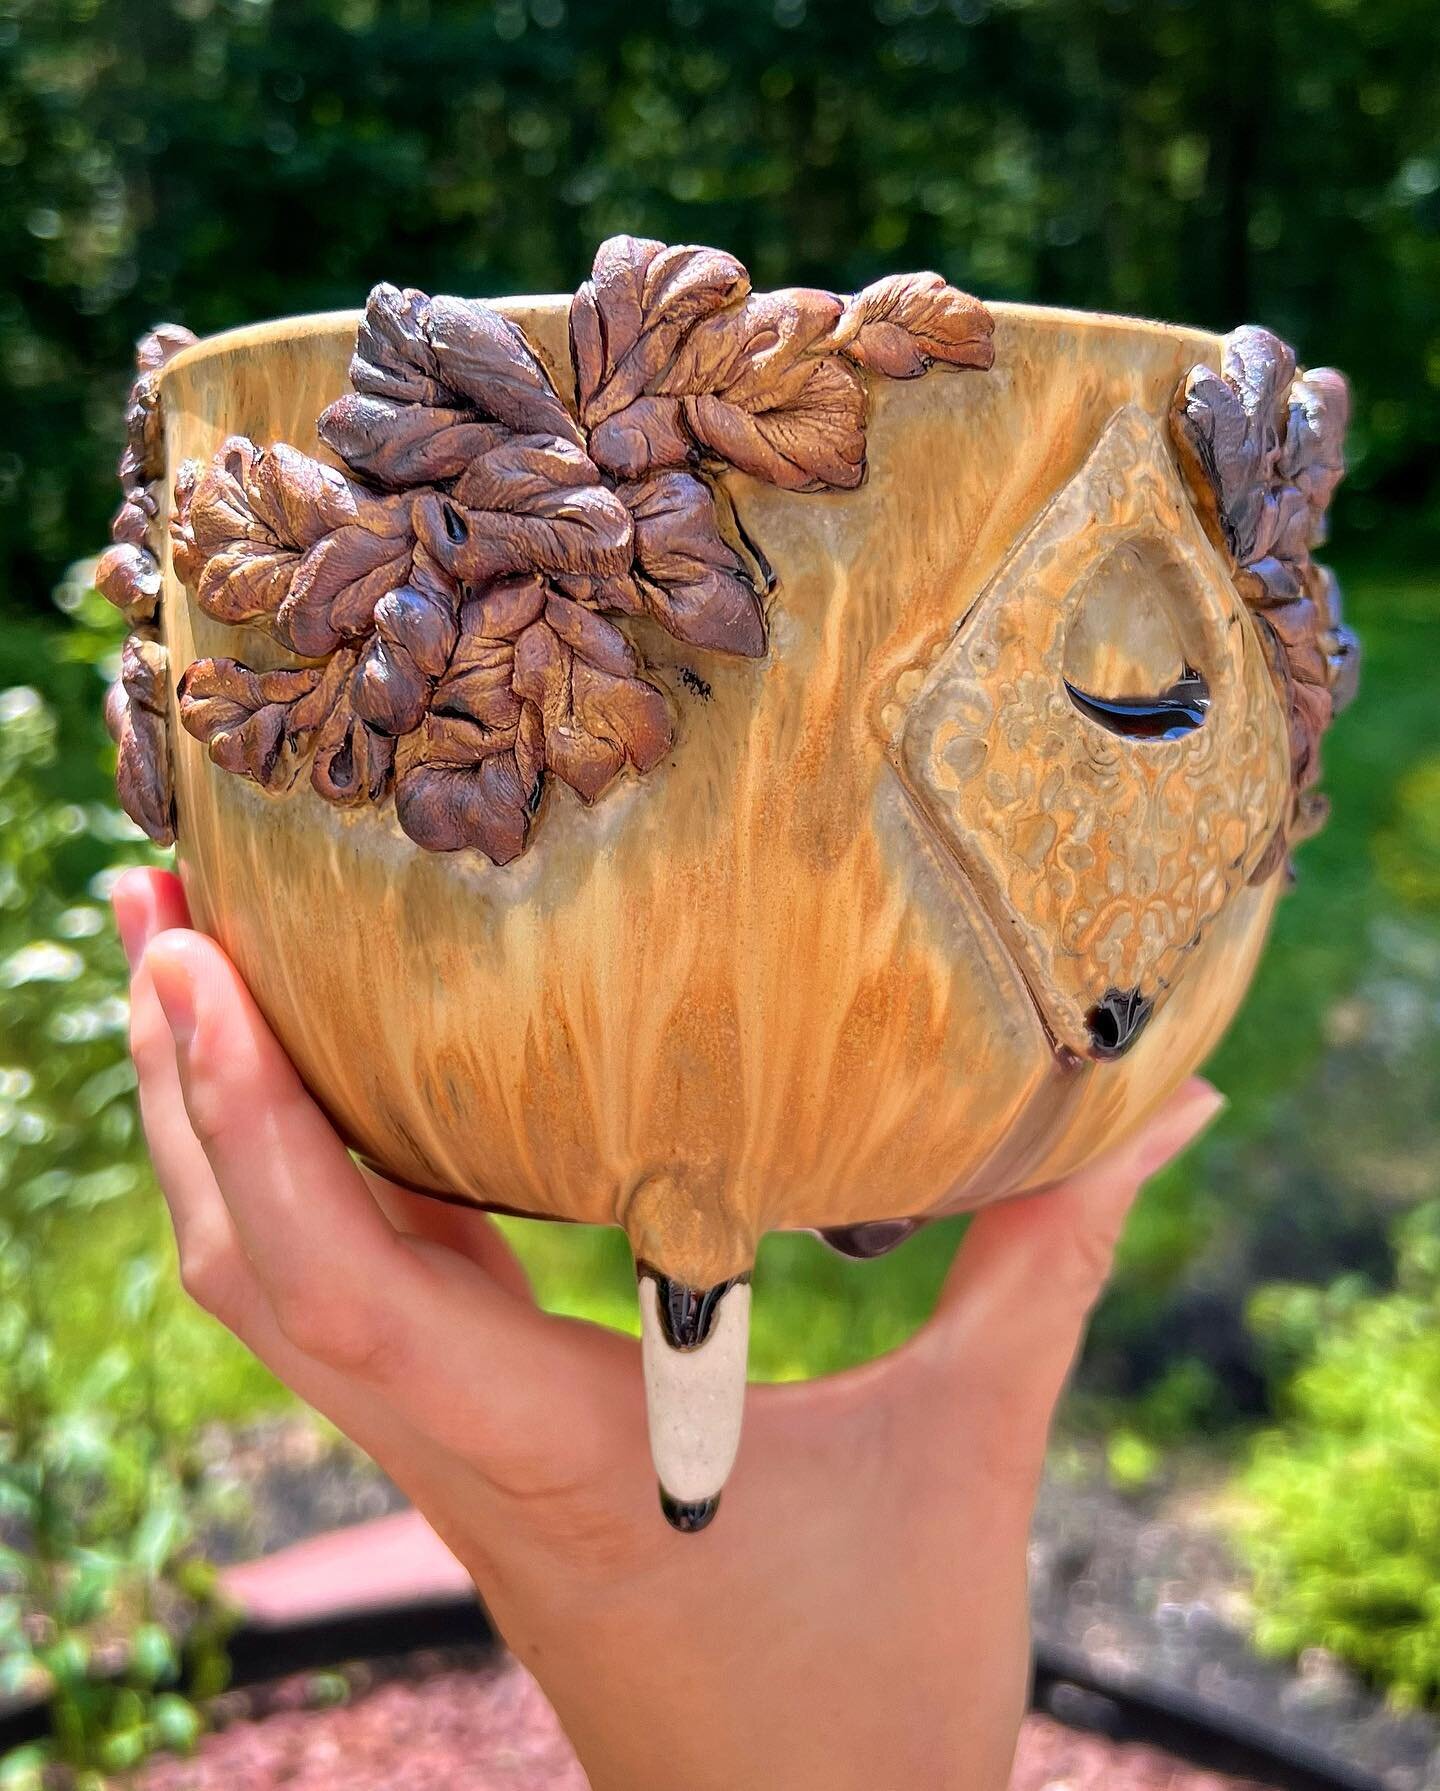 Hello everyone! I&rsquo;ve been busy with lots of custom orders lately! This cocoon caldron planter was a recent favorite. It was inspired by a tiny cauldron jar the customer had seen at one of my markets (in the last photo), so they requested a coco